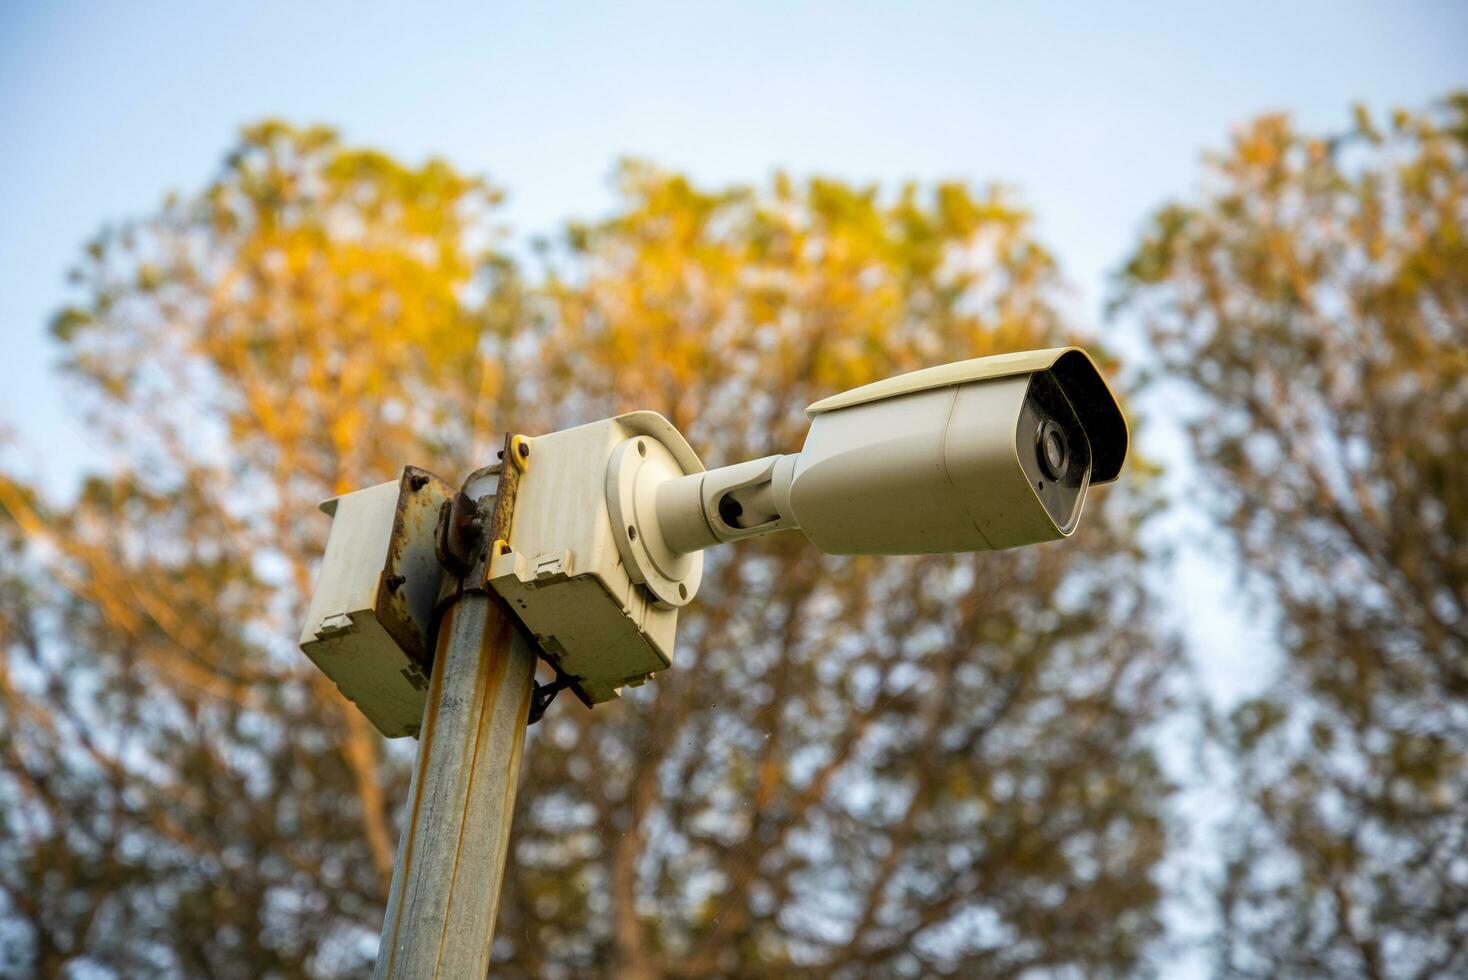 CC.TV. cameras on metal poles in public parks to monitor, observe and record evidence of incidents for investigation. photo